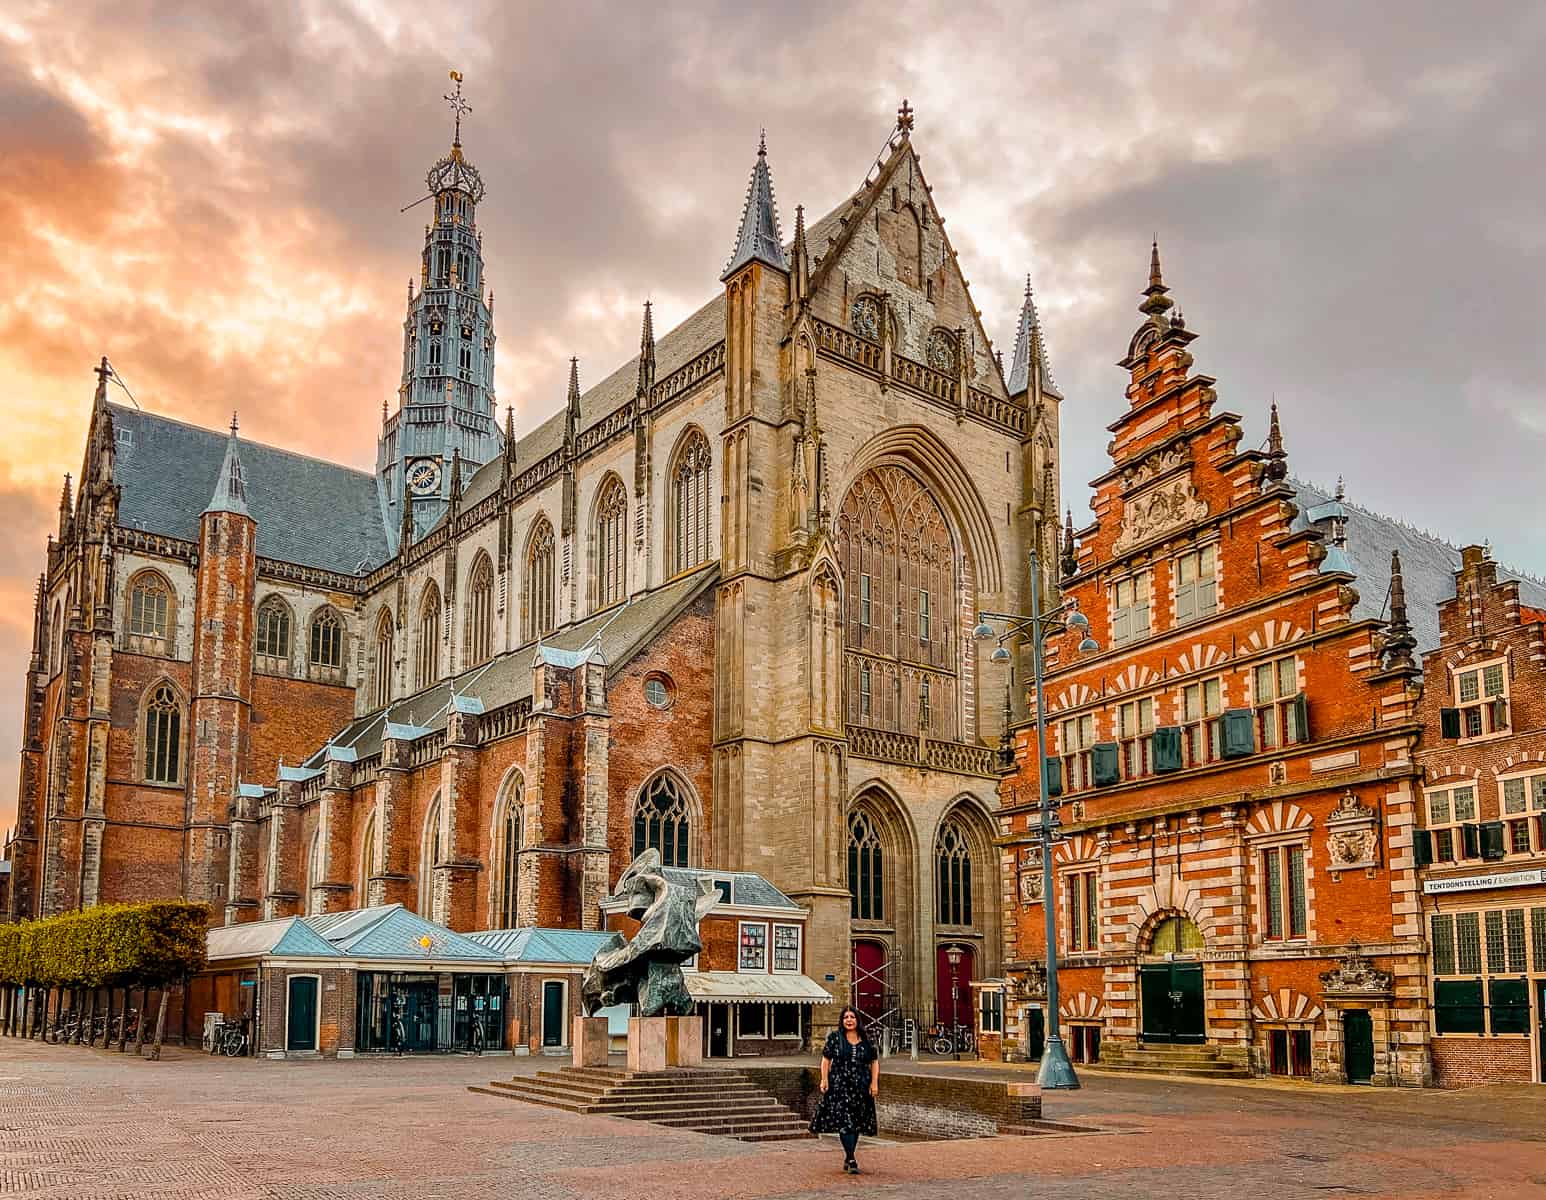 Things to do in Haarlem Netherlands worth visiting